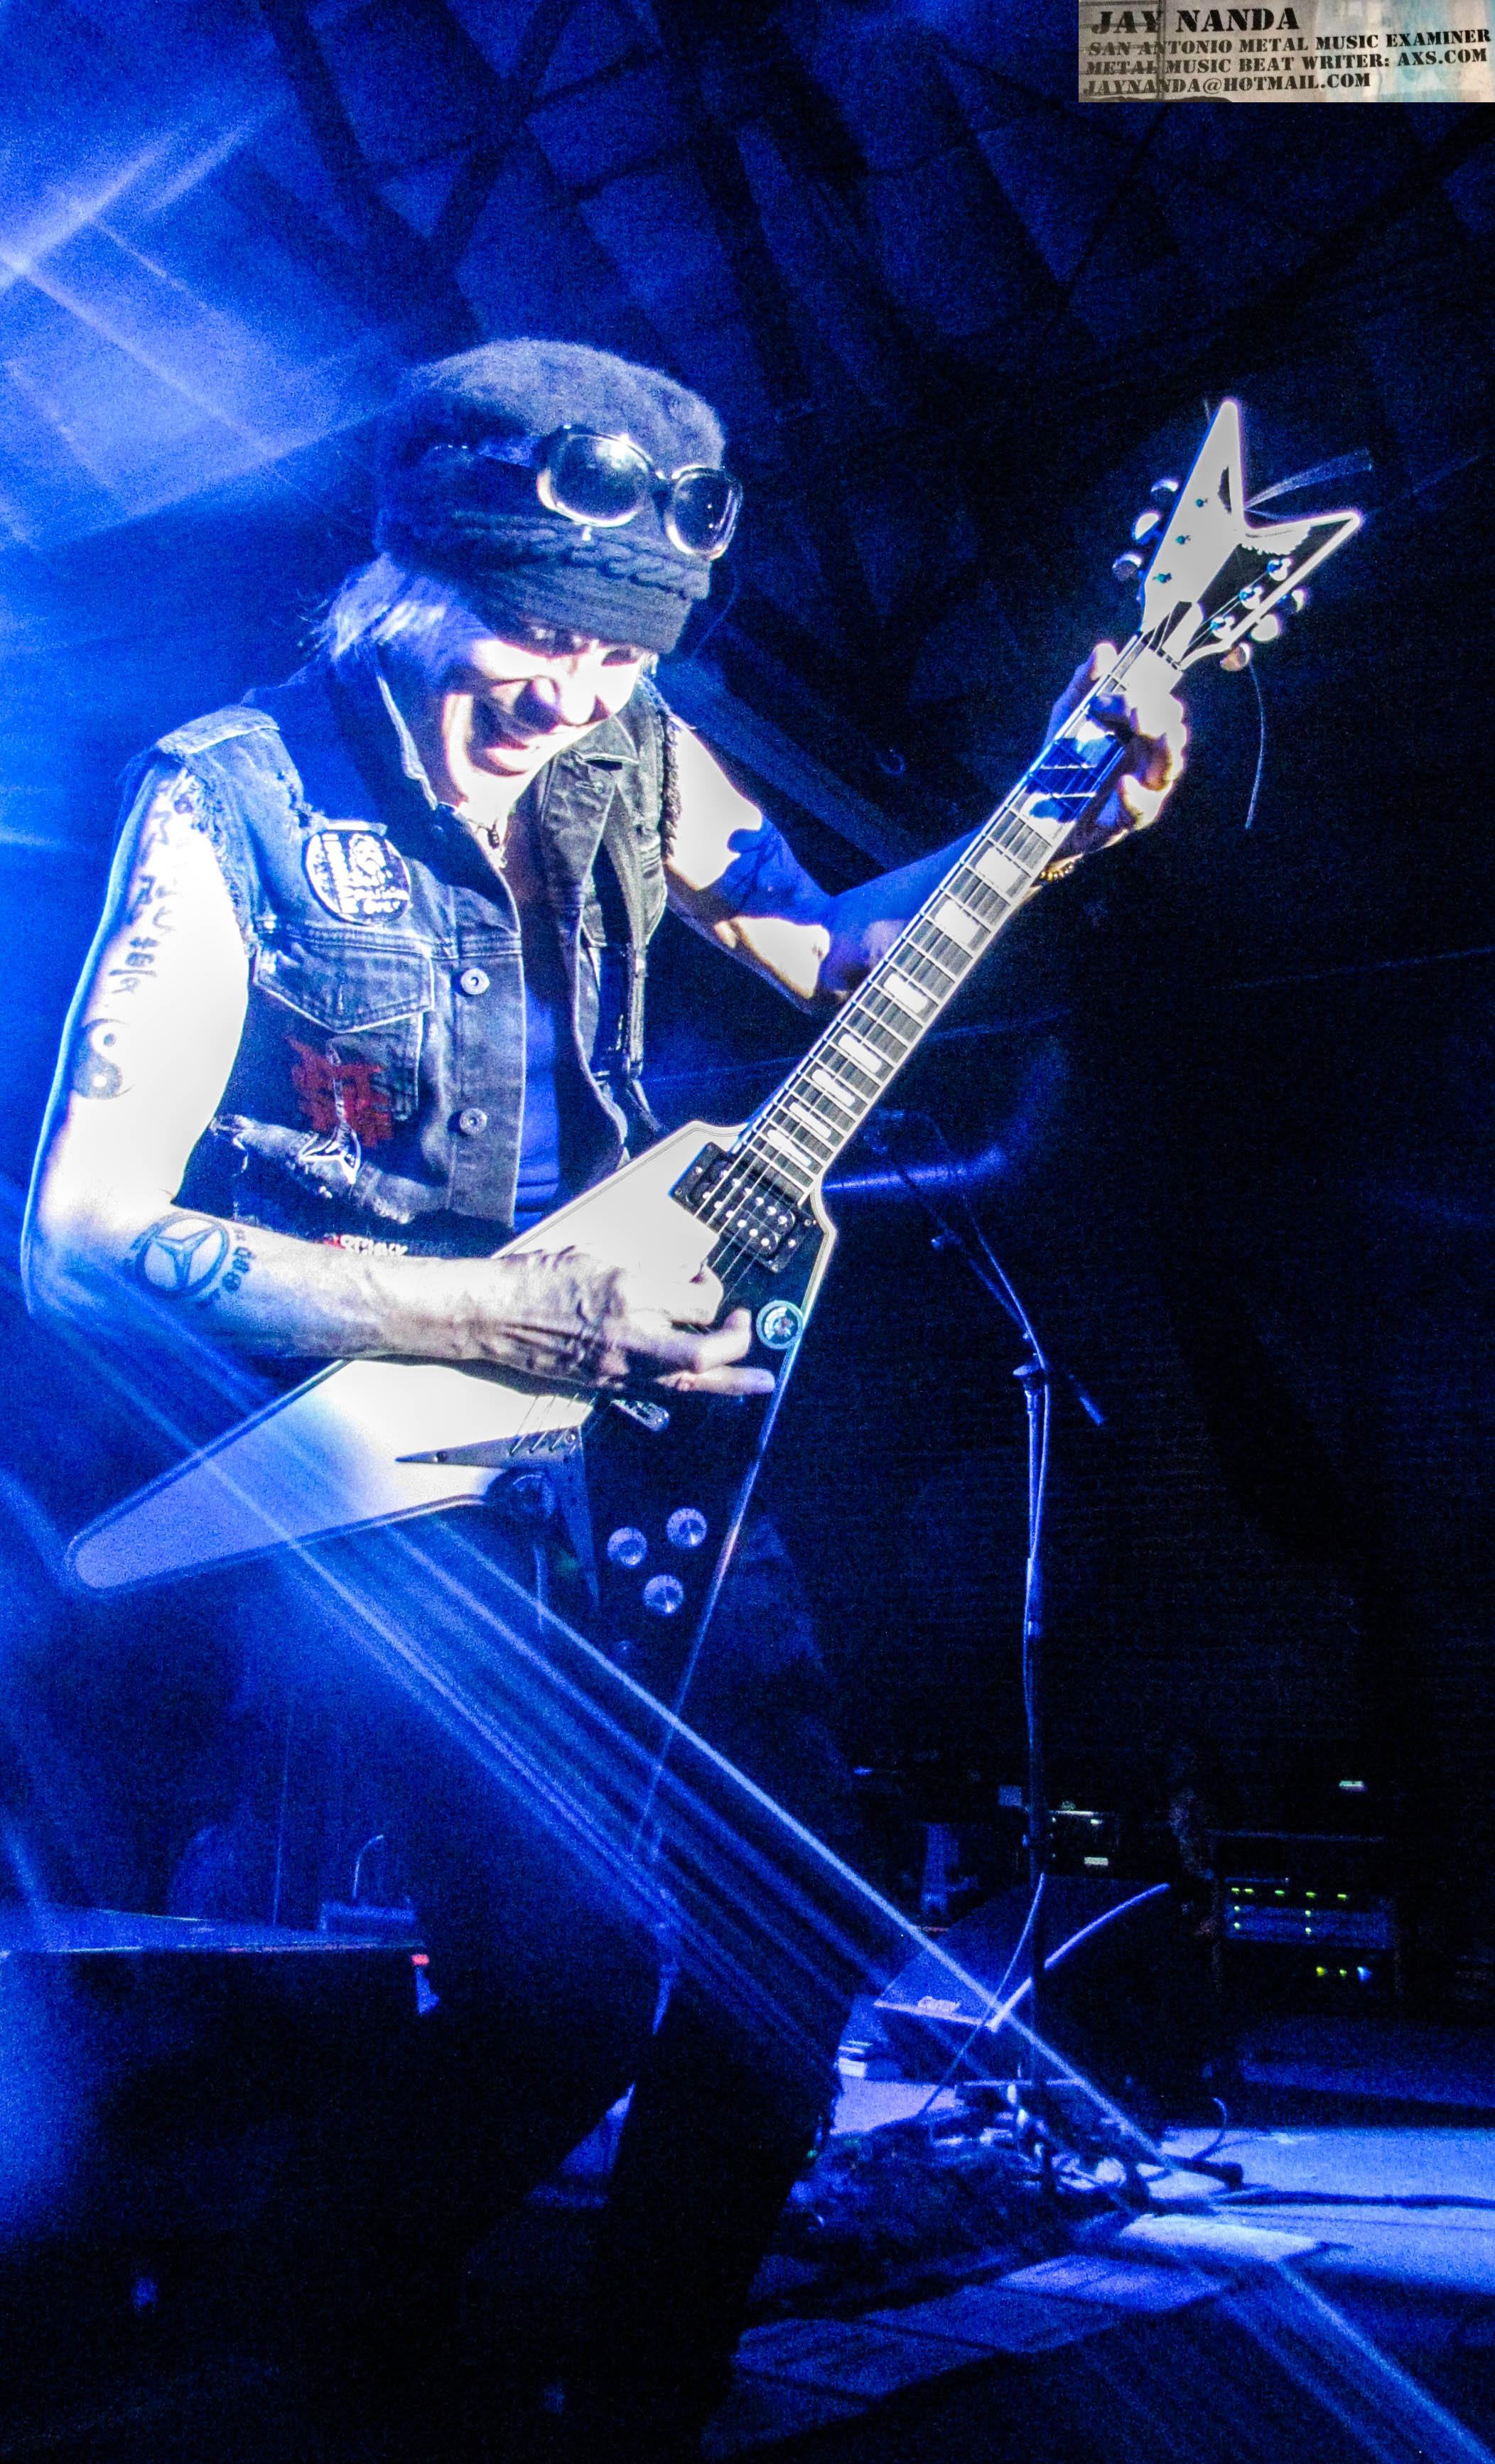  Schenker rips into a solo. 